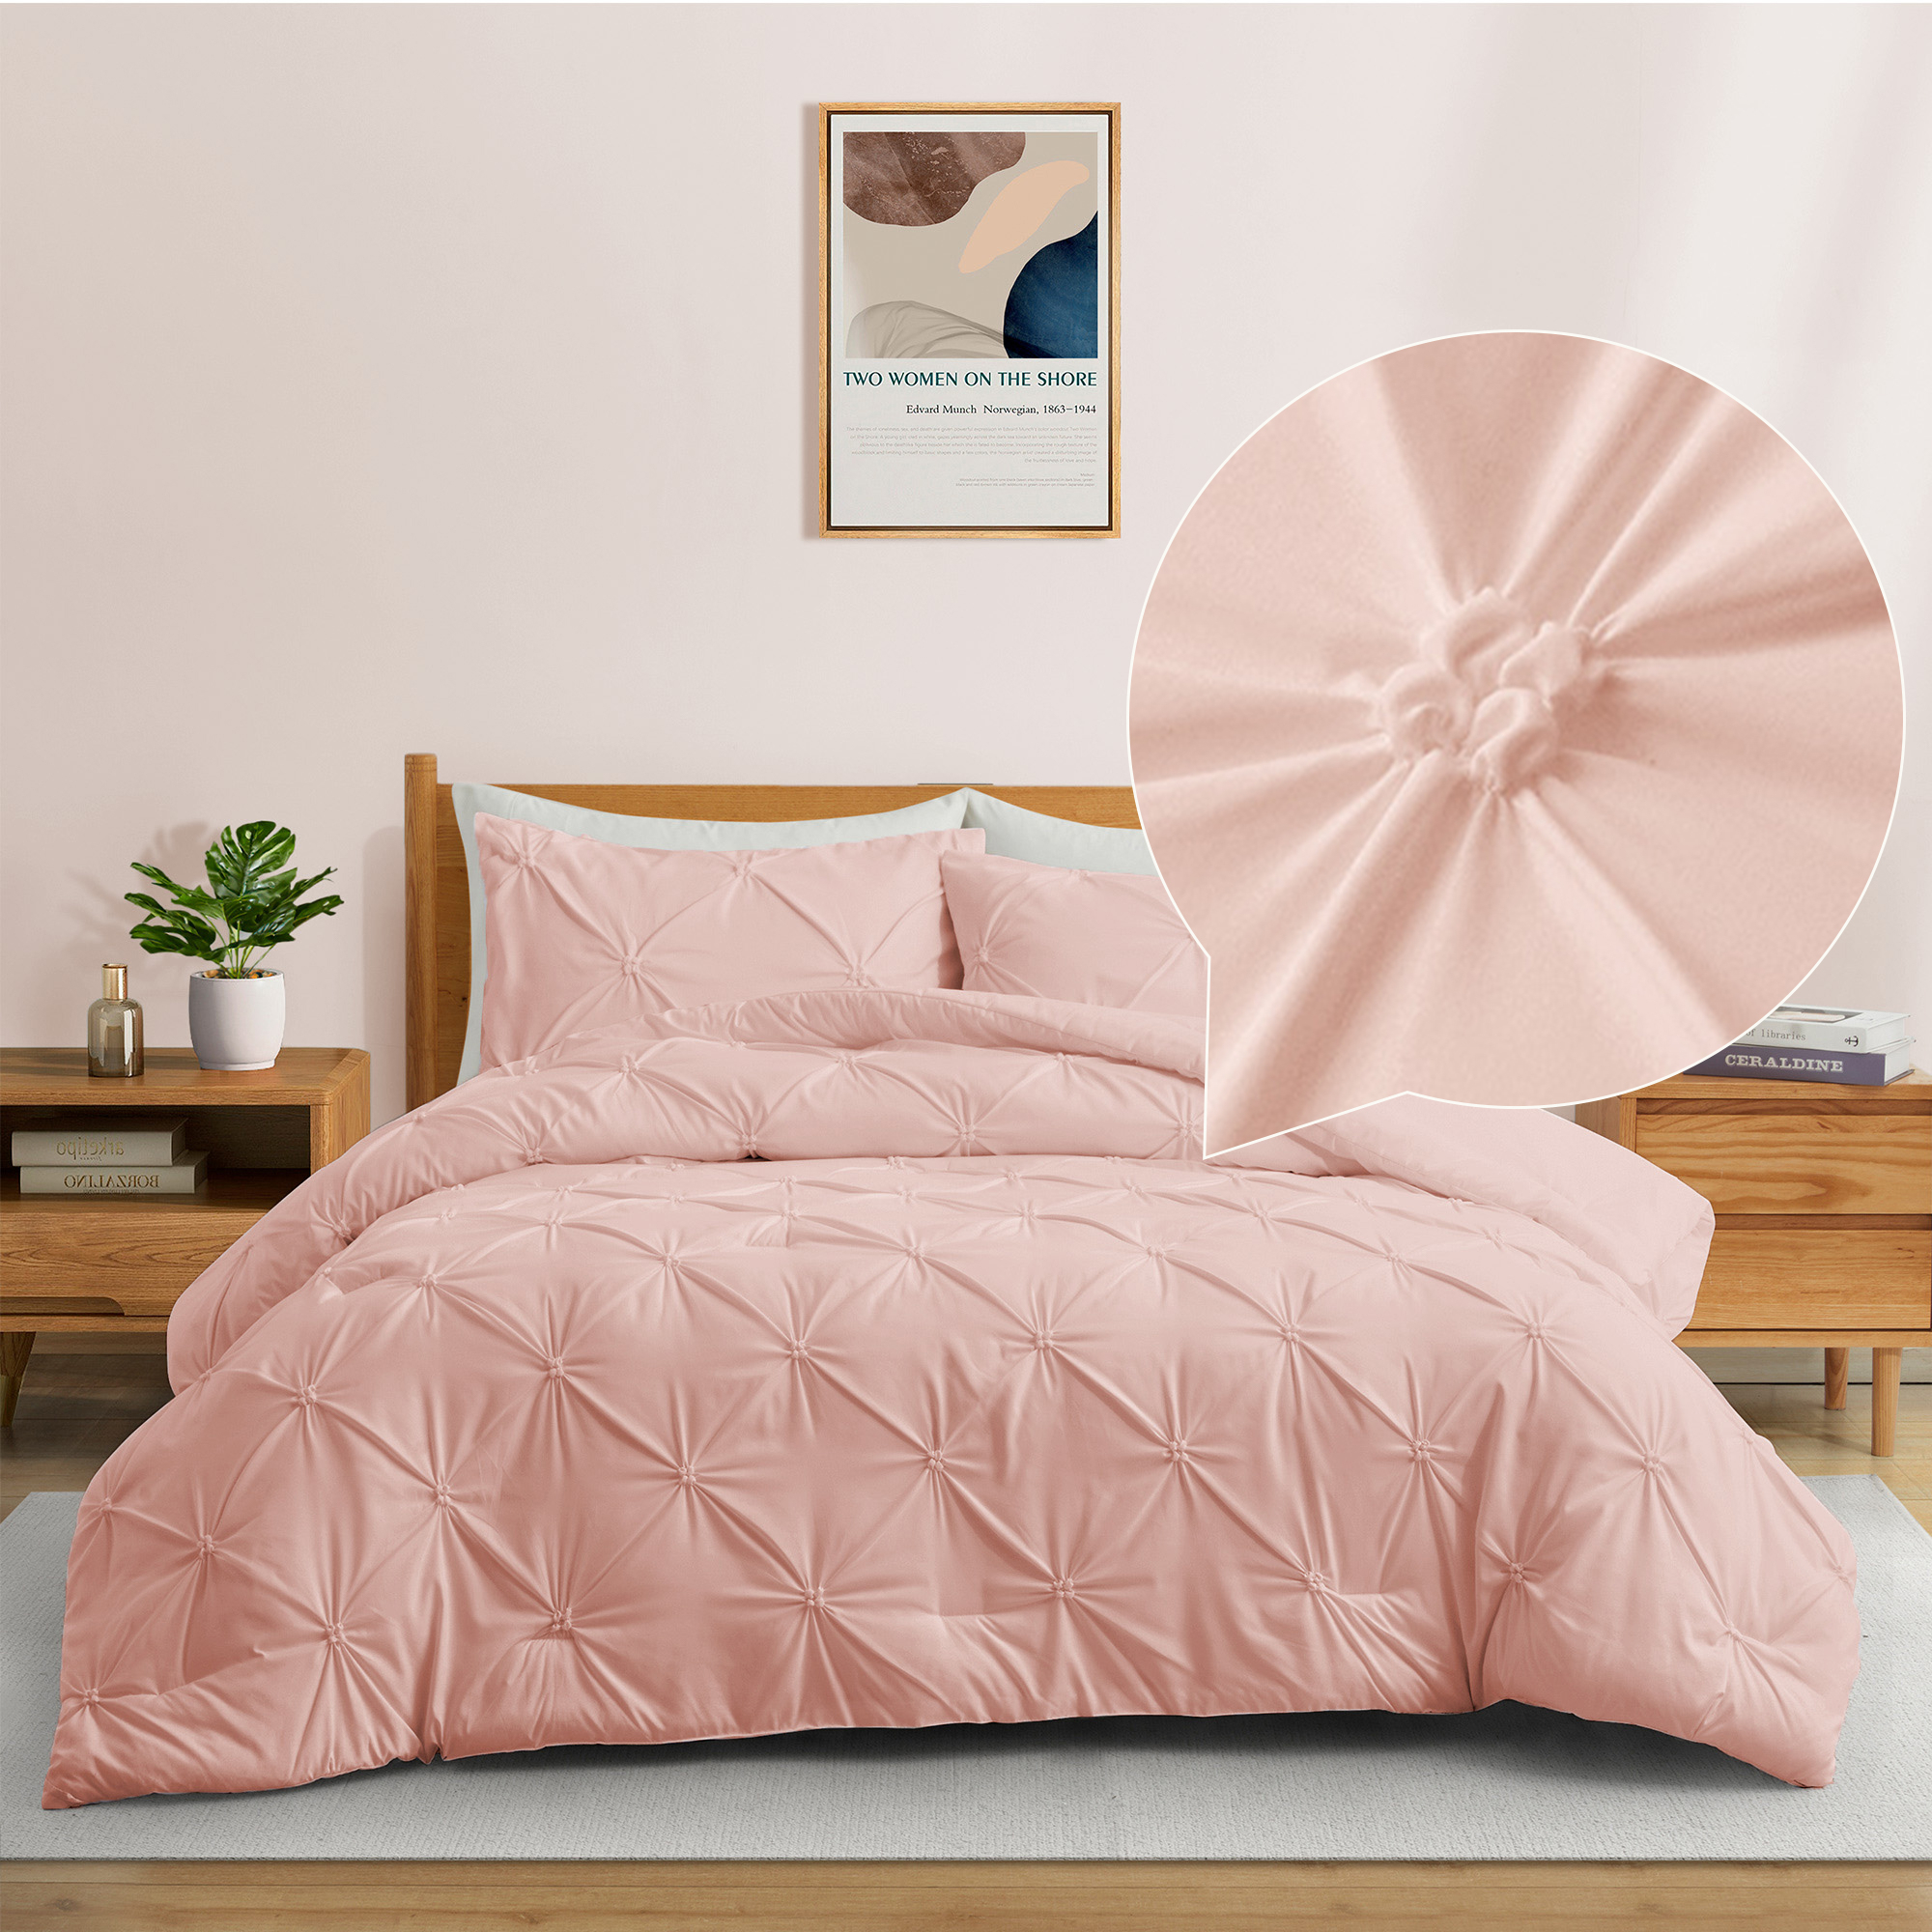 Pinch Pleat Down Alternative Comforter Set, 2 Or 3 Piece Comforter Set With Shams - Full/Queen Size